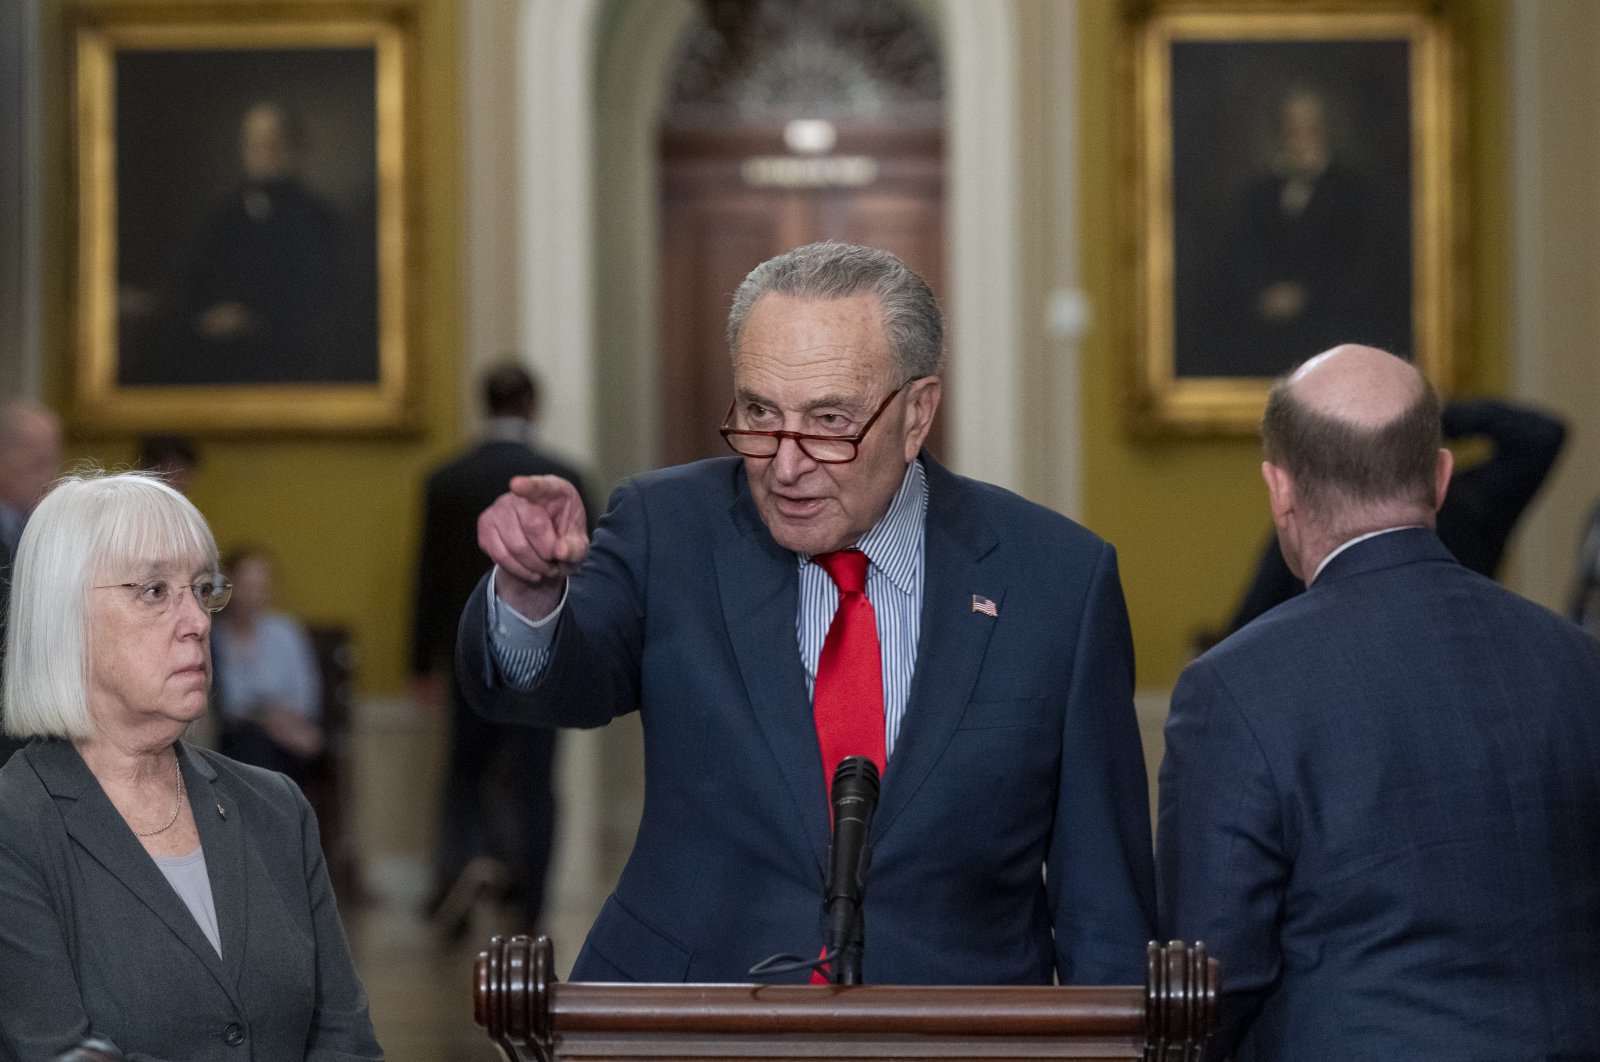 Senate Majority Leader Chuck Schumer responds to a question from the news media during a press conference in the U.S. Capitol in Washington, D.C., March 12, 2024. (EPA Photo)